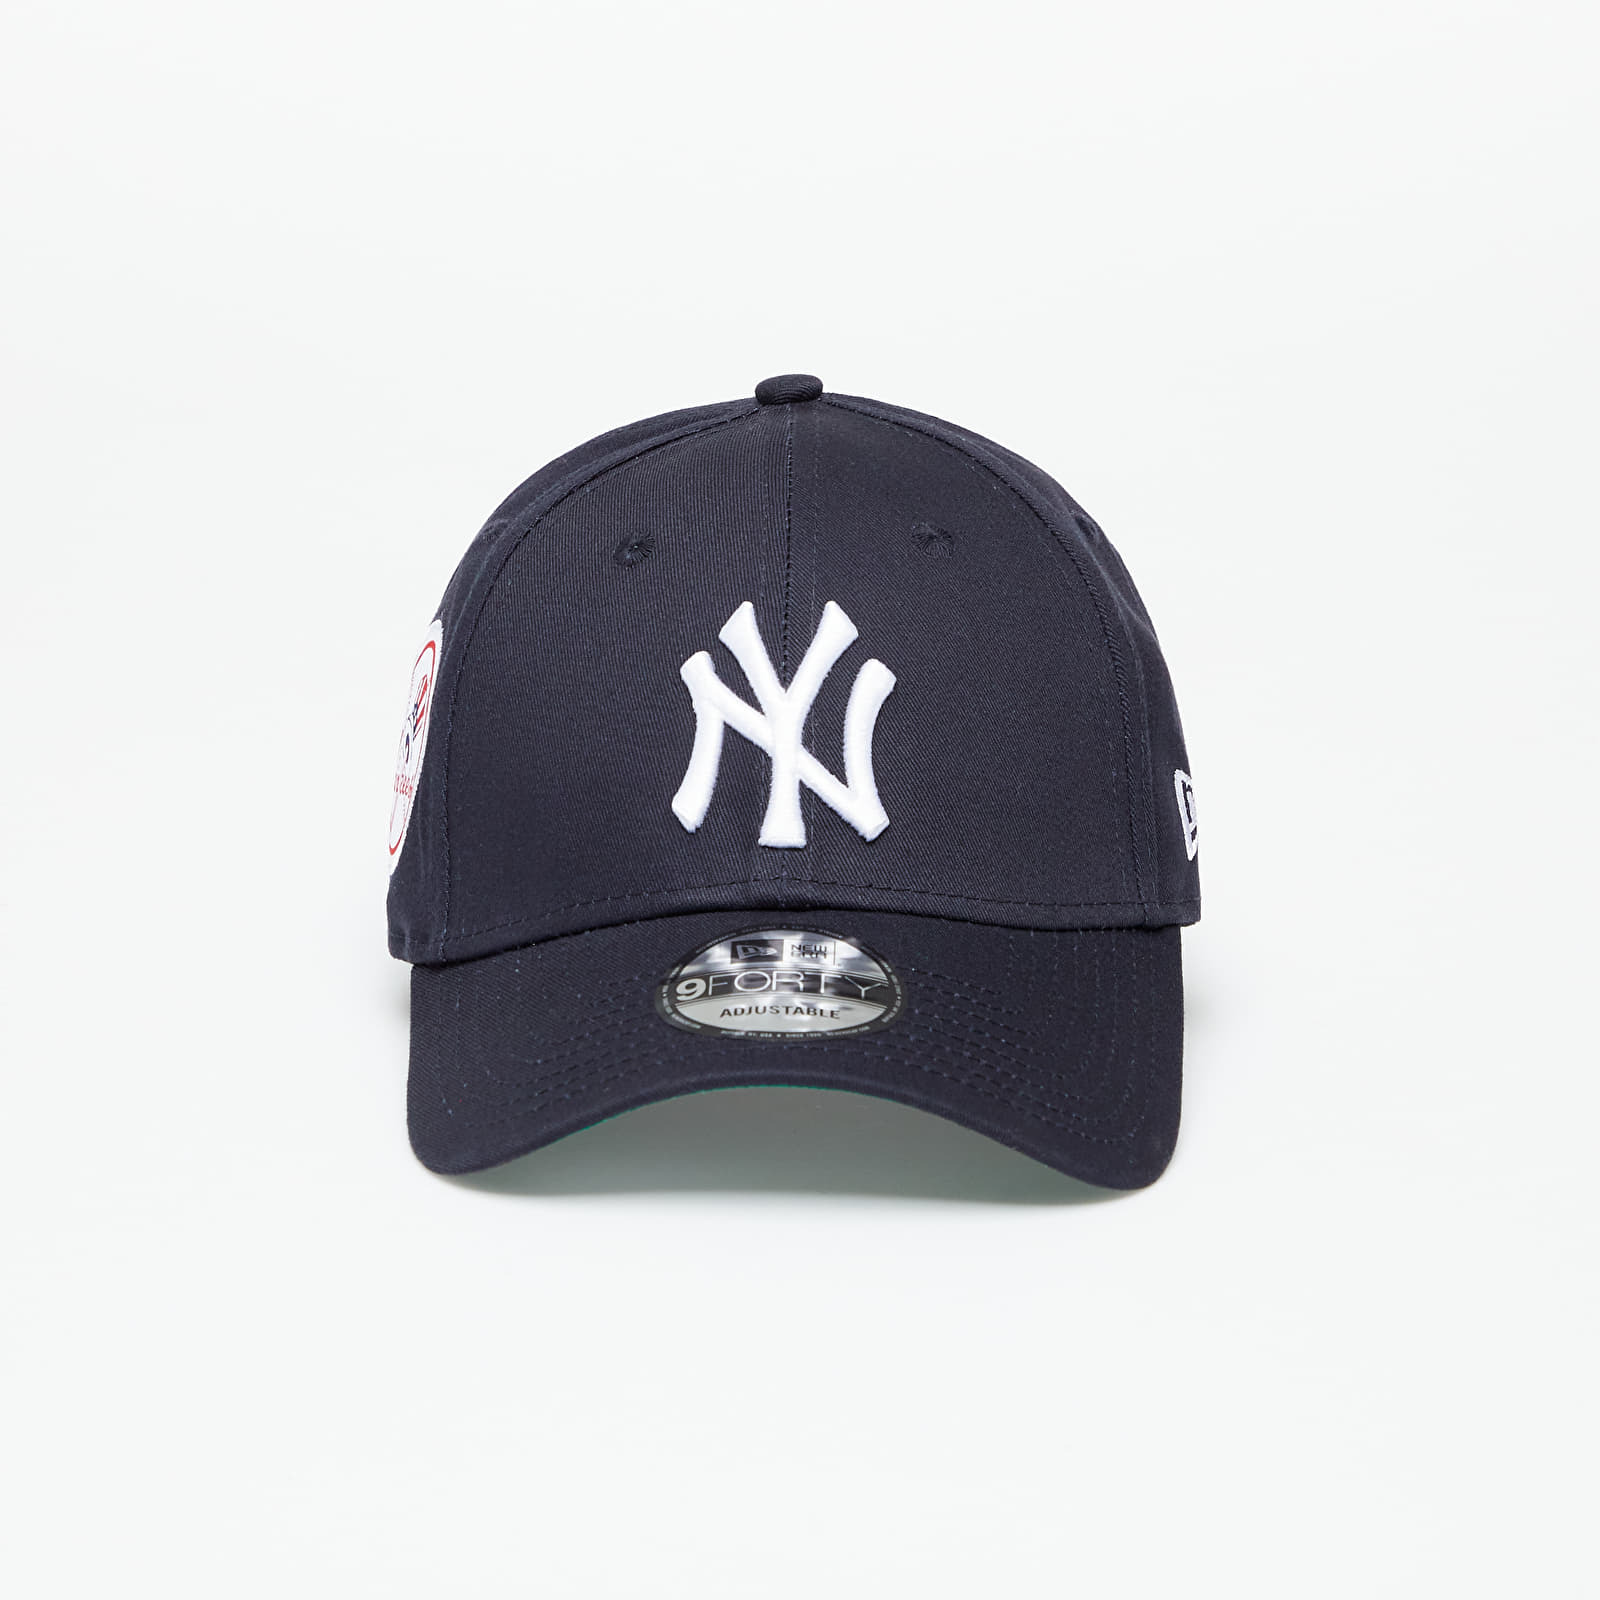 New Era - new york yankees team side patch 9forty adjustable cap navy/ optic white